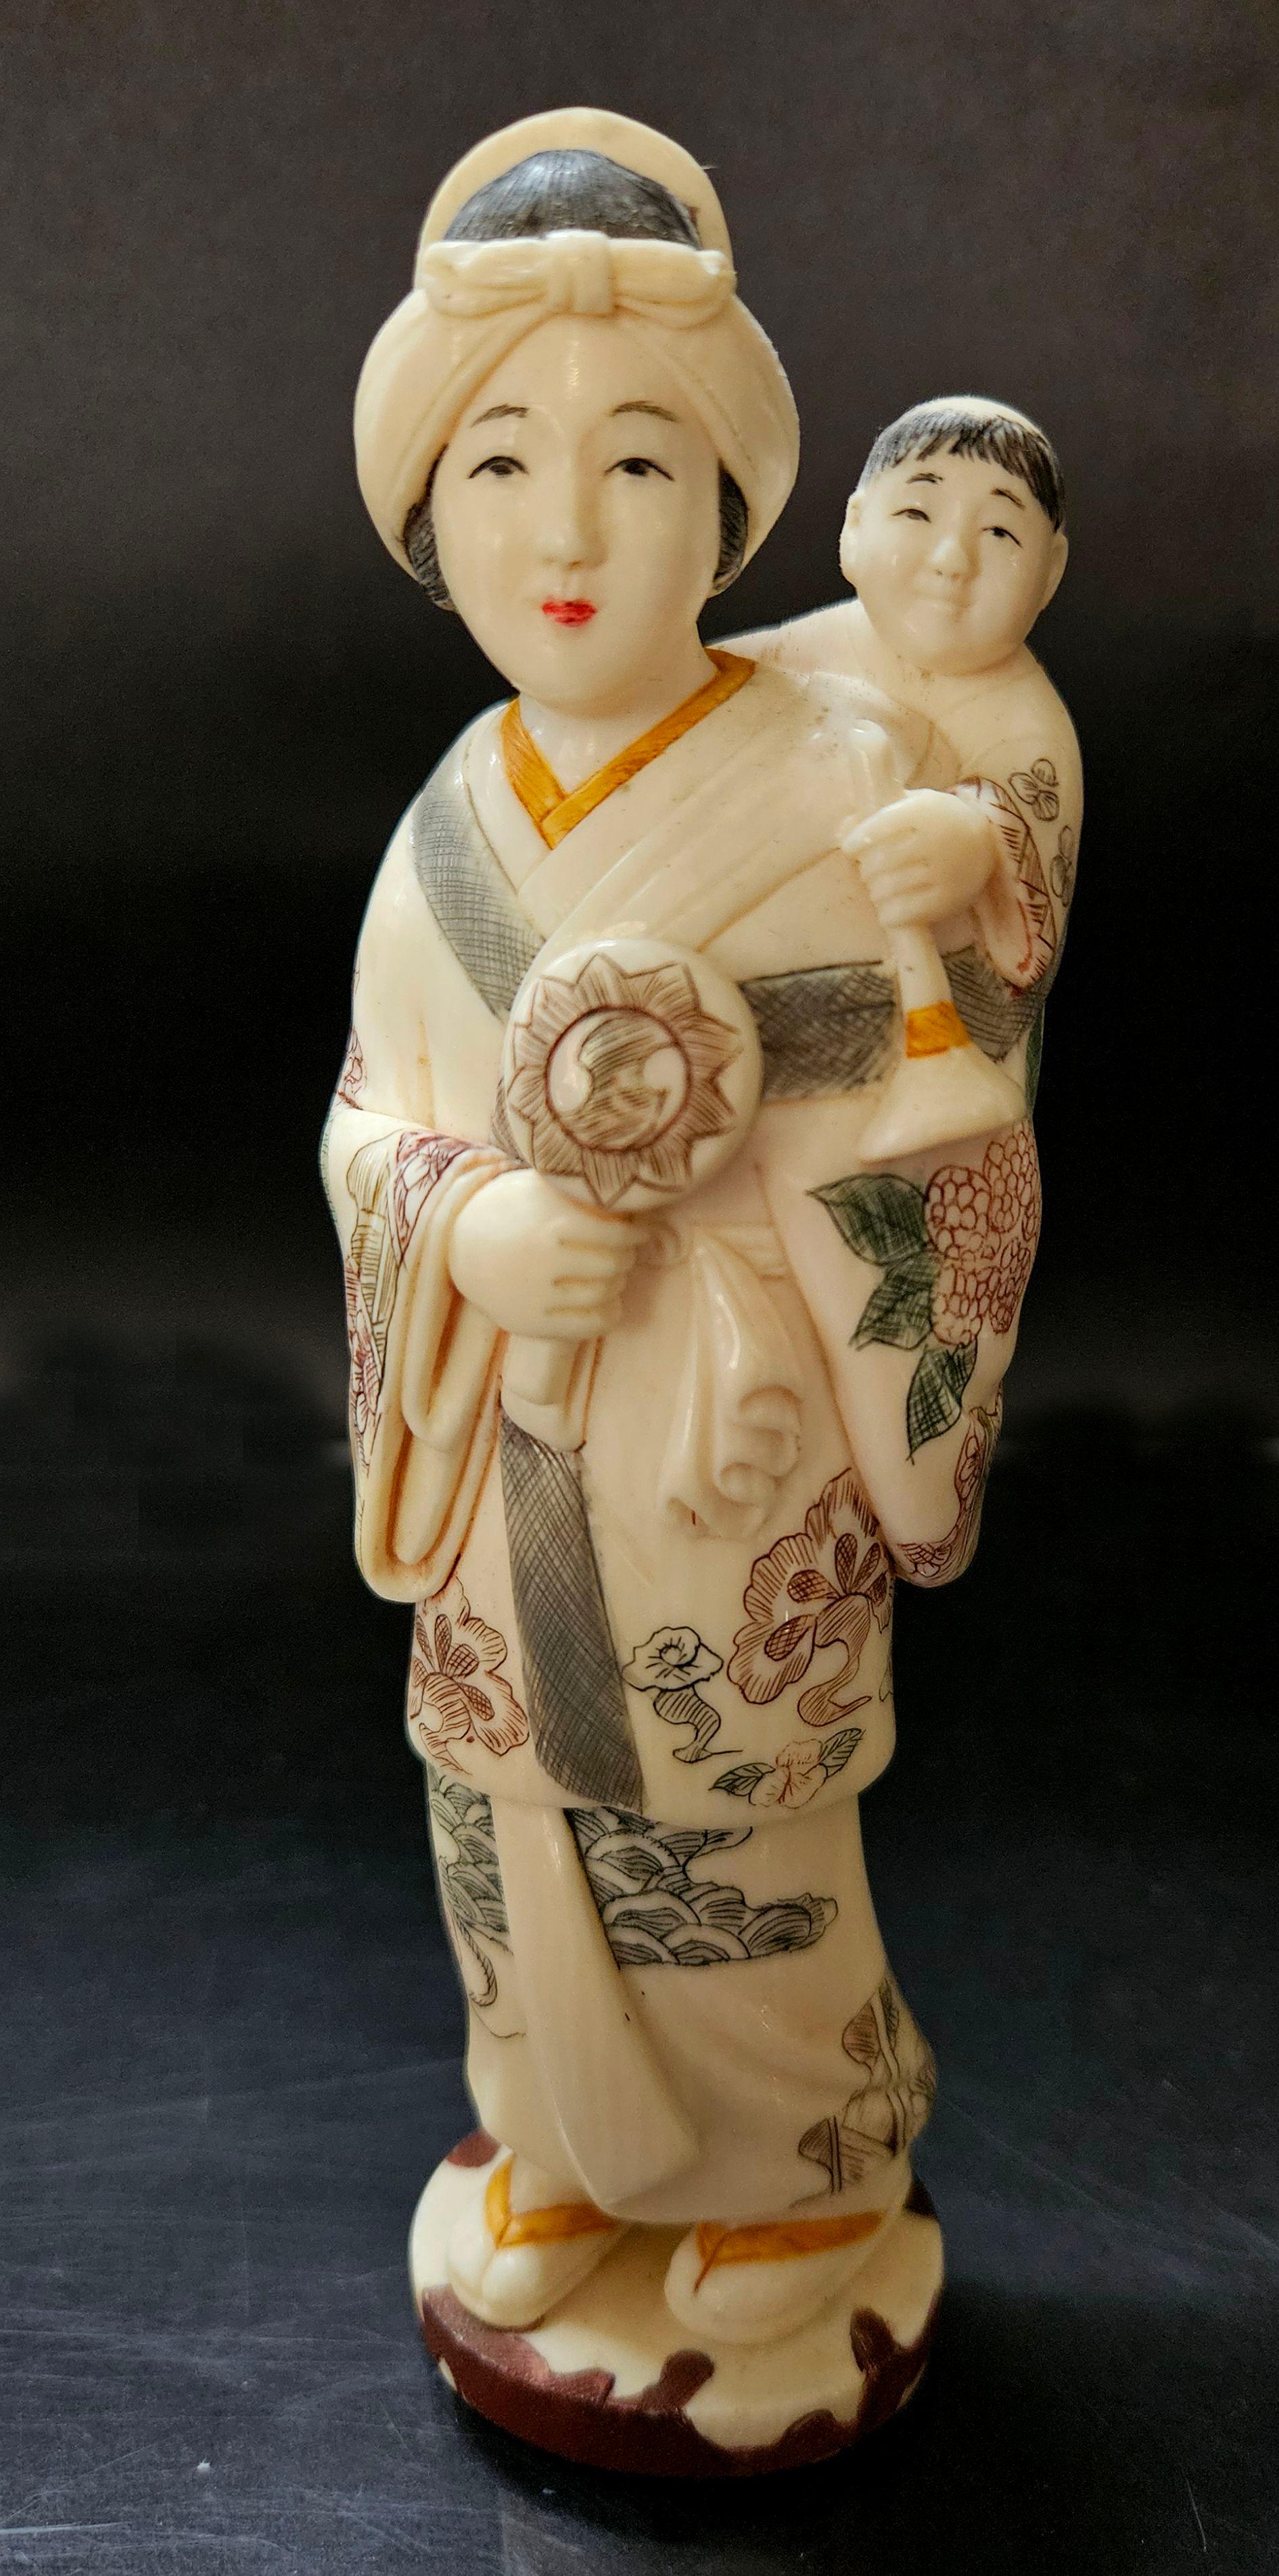 Antique Japanese Carved Okimono Polychrome Decorated Figure Group Mother & Son, Meiji Period 

This item is 2